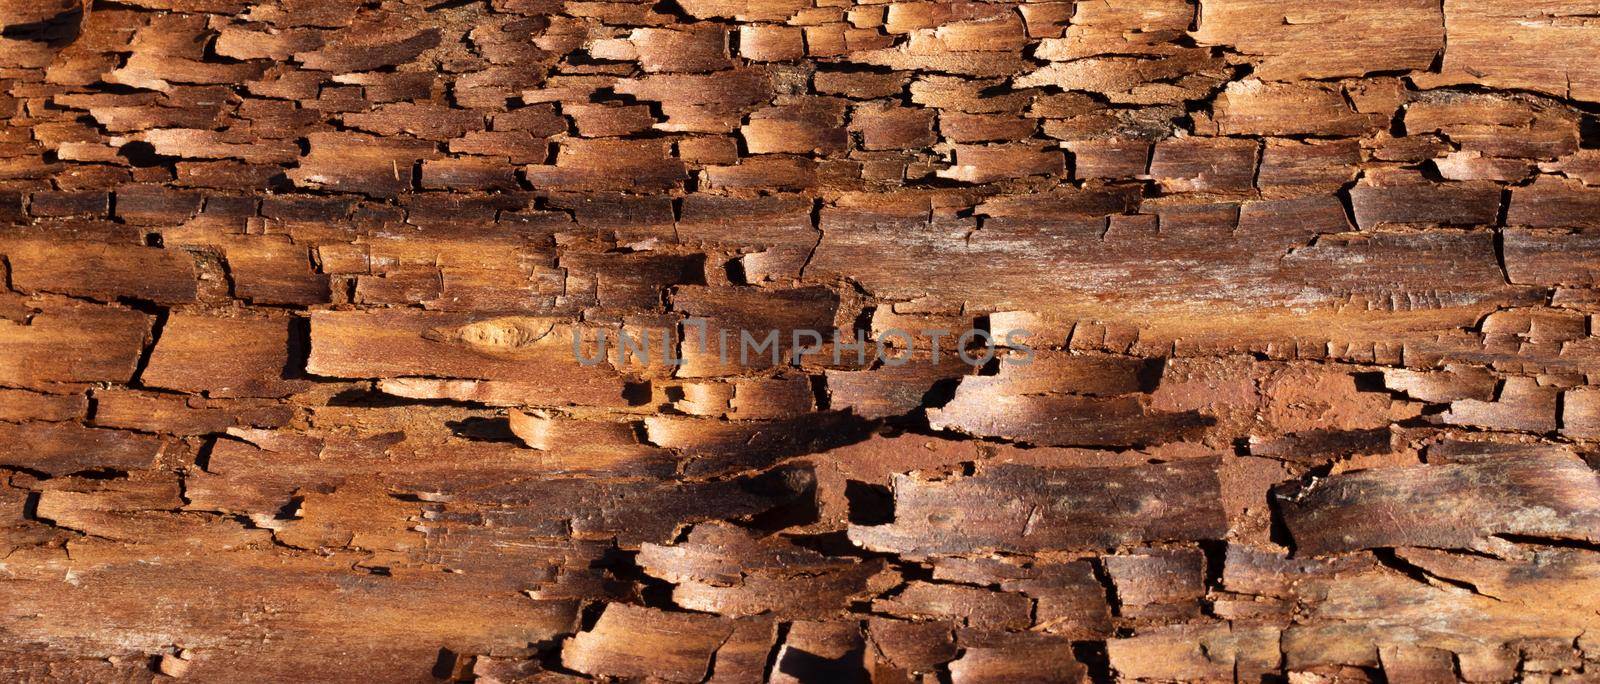 The bark pattern is a seamless wood texture. For background woodwork, brown hardwood bark. place for text. by lapushka62